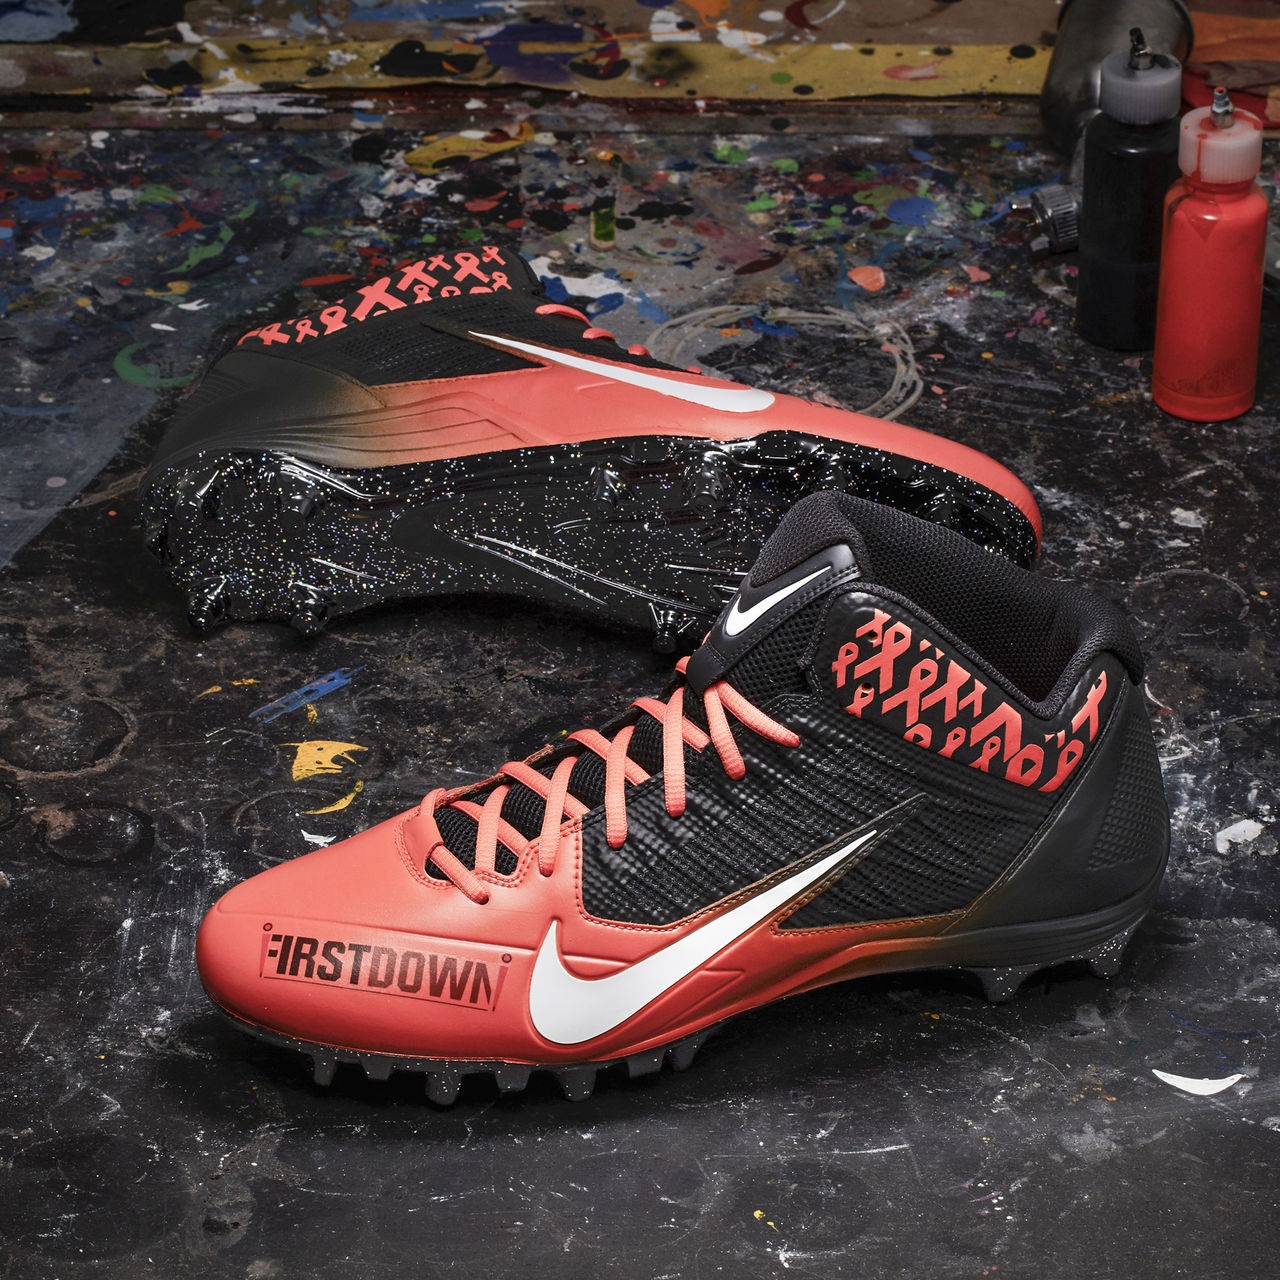 Larry Fitzgerald Nike Alpha Pro First Down Fund Cleats